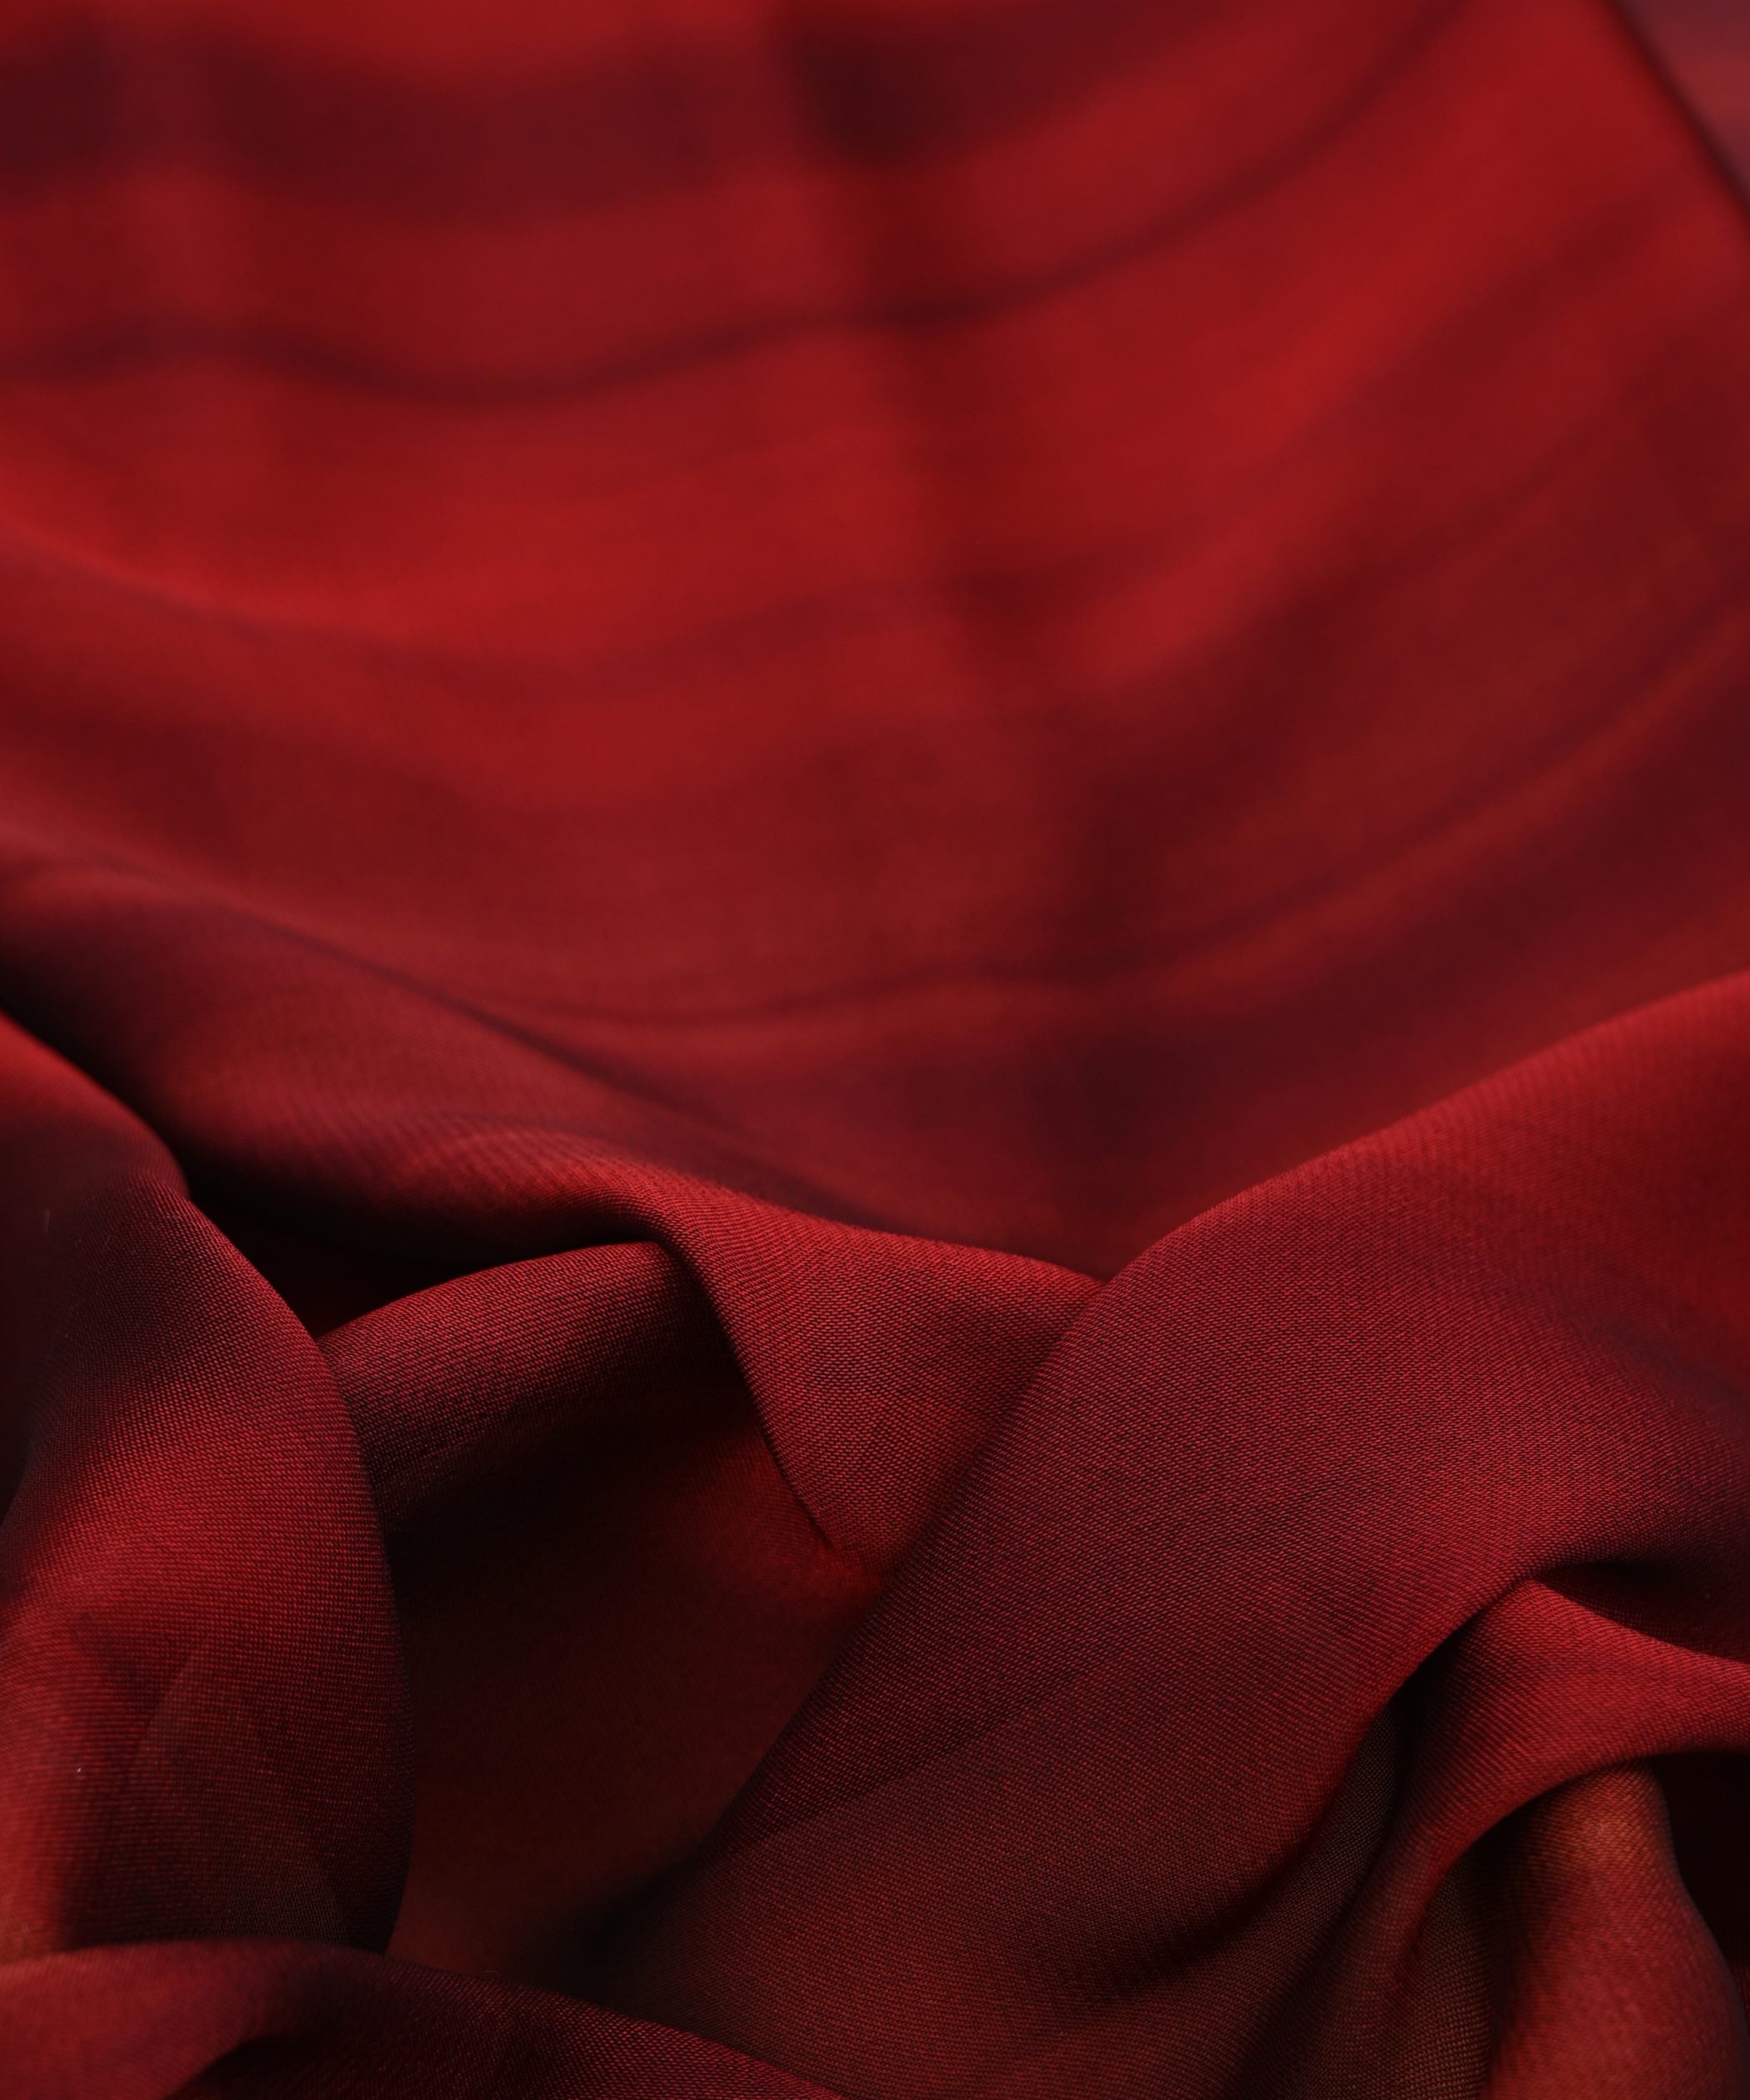 Red Georgette Fabric with Shaded Stripes